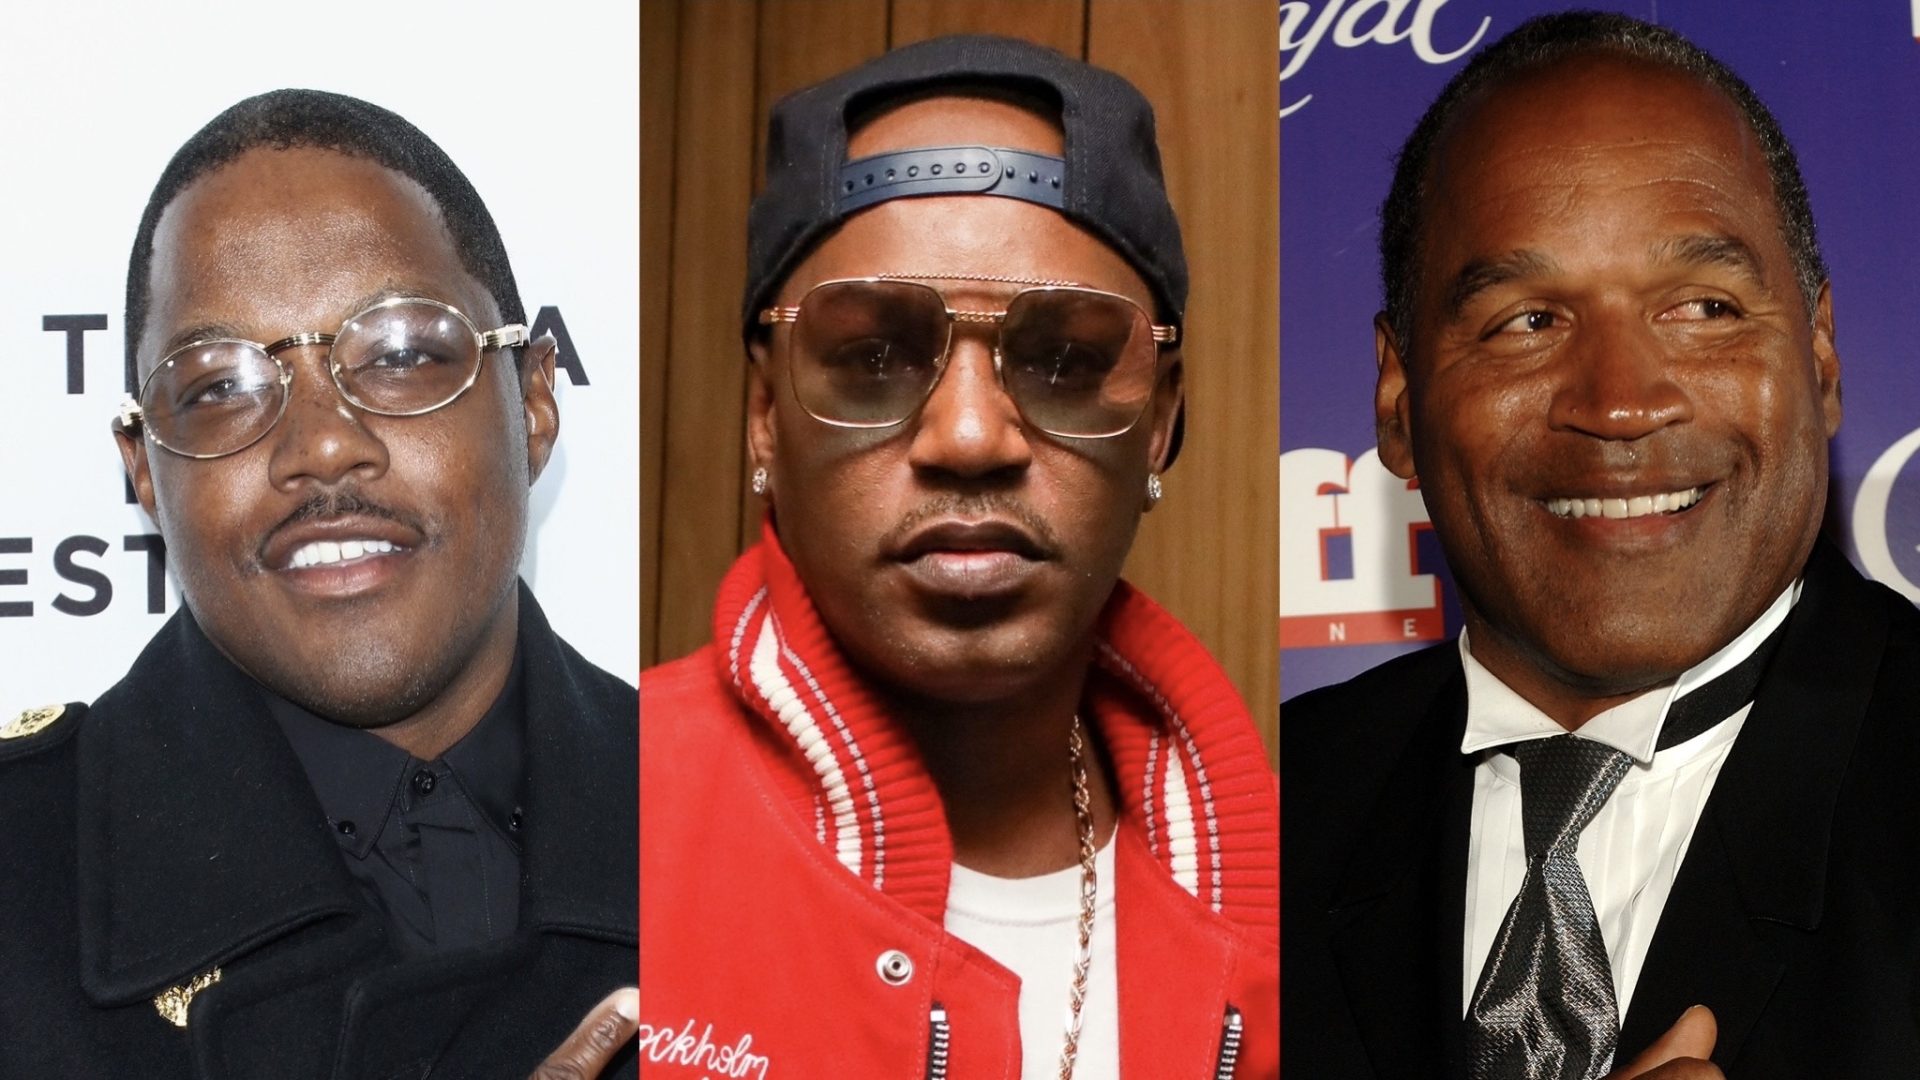 Mase And Cam’ron React To The Passing Of O.J. Simpson (Video) thumbnail